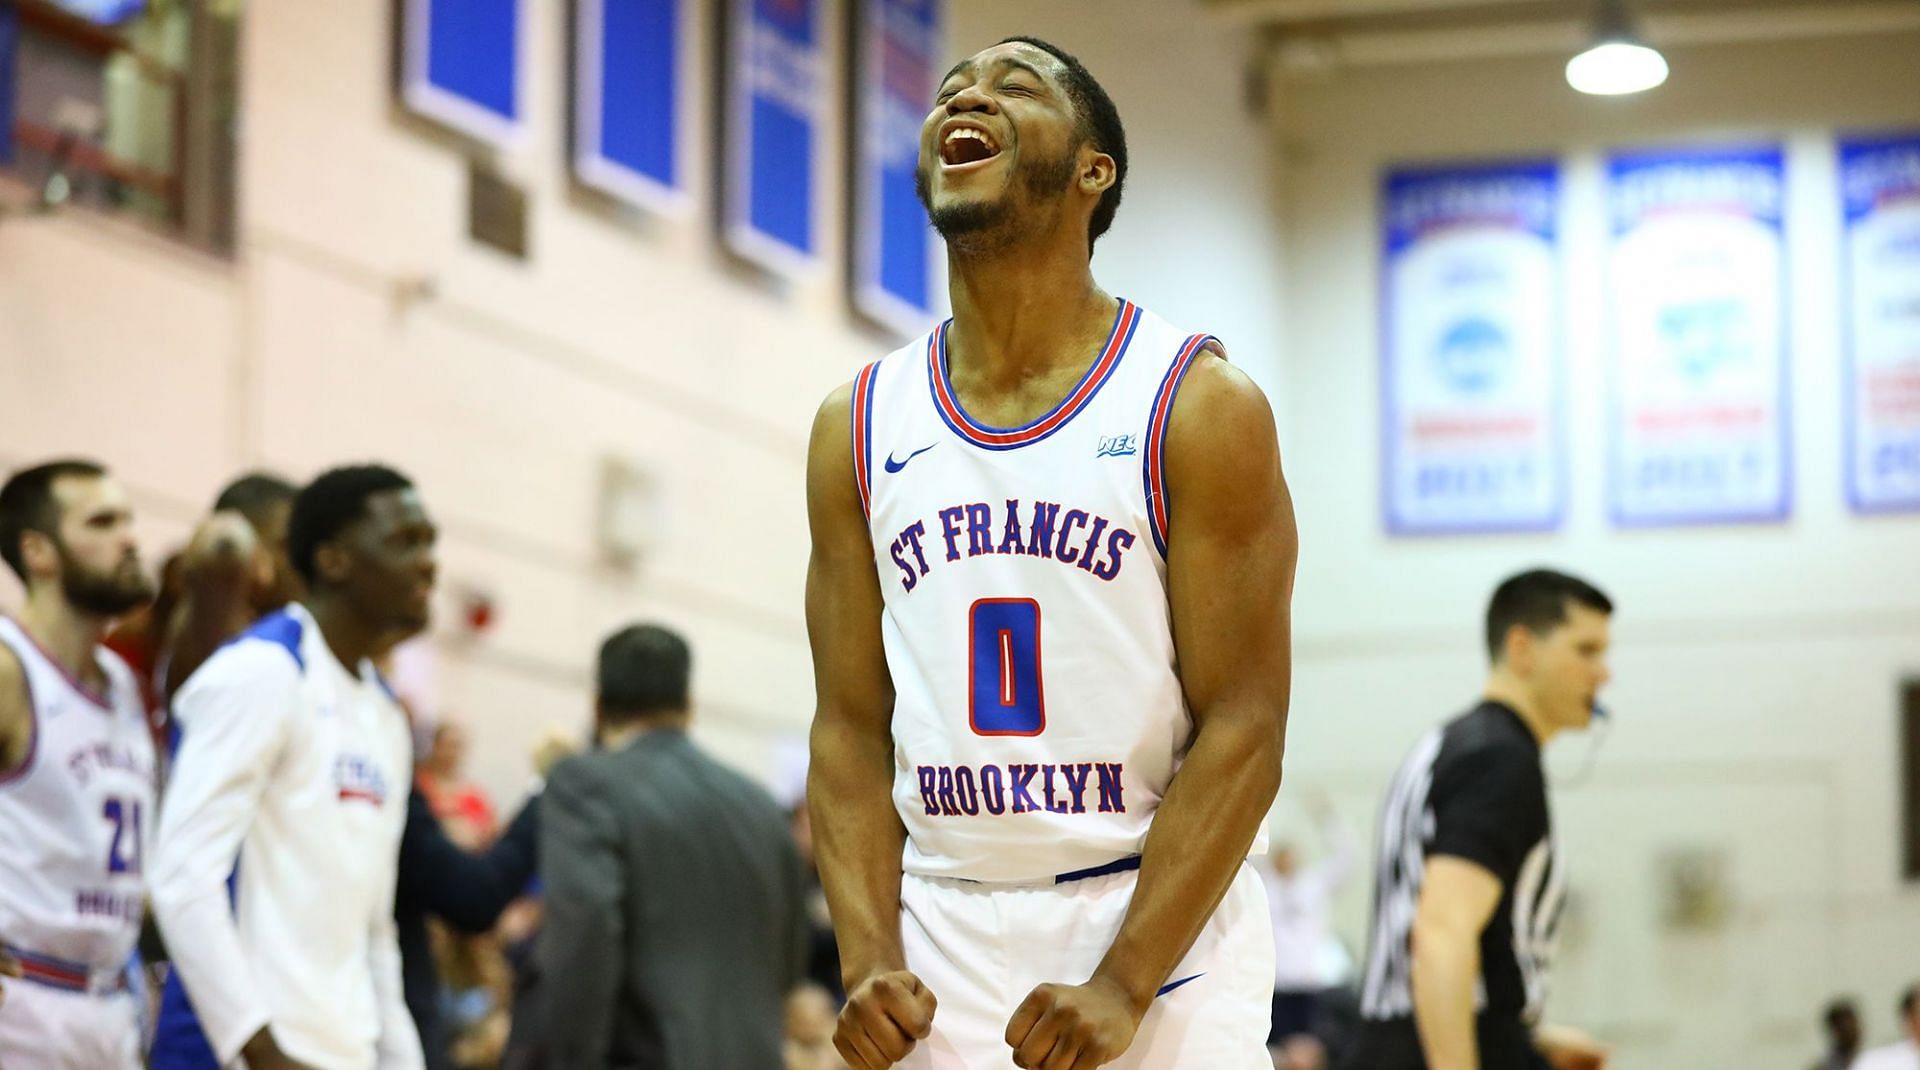 St. Francis PA to host St. Francis BK on Friday